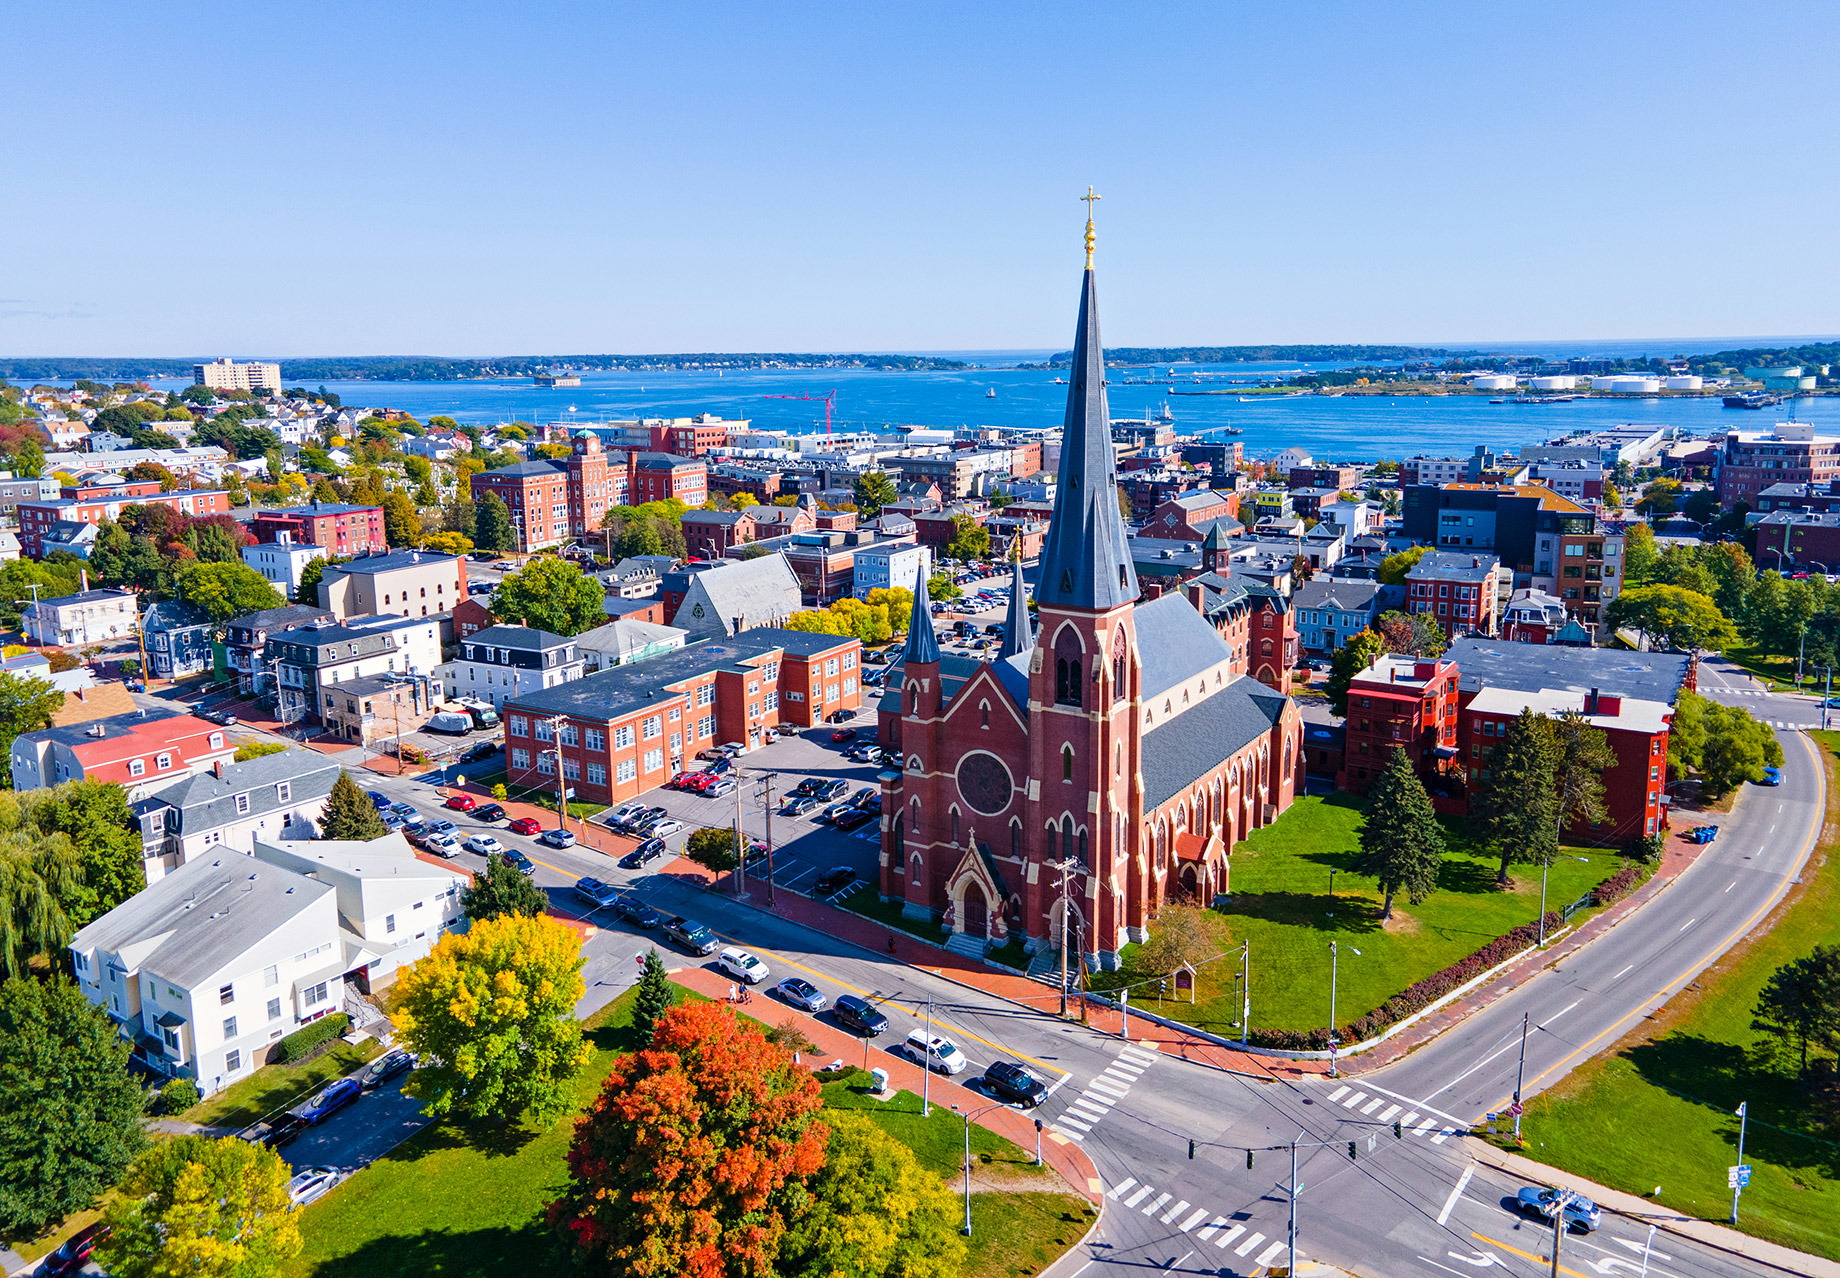 Cathedral of the Immaculate Conception - Portland, Maine, USA